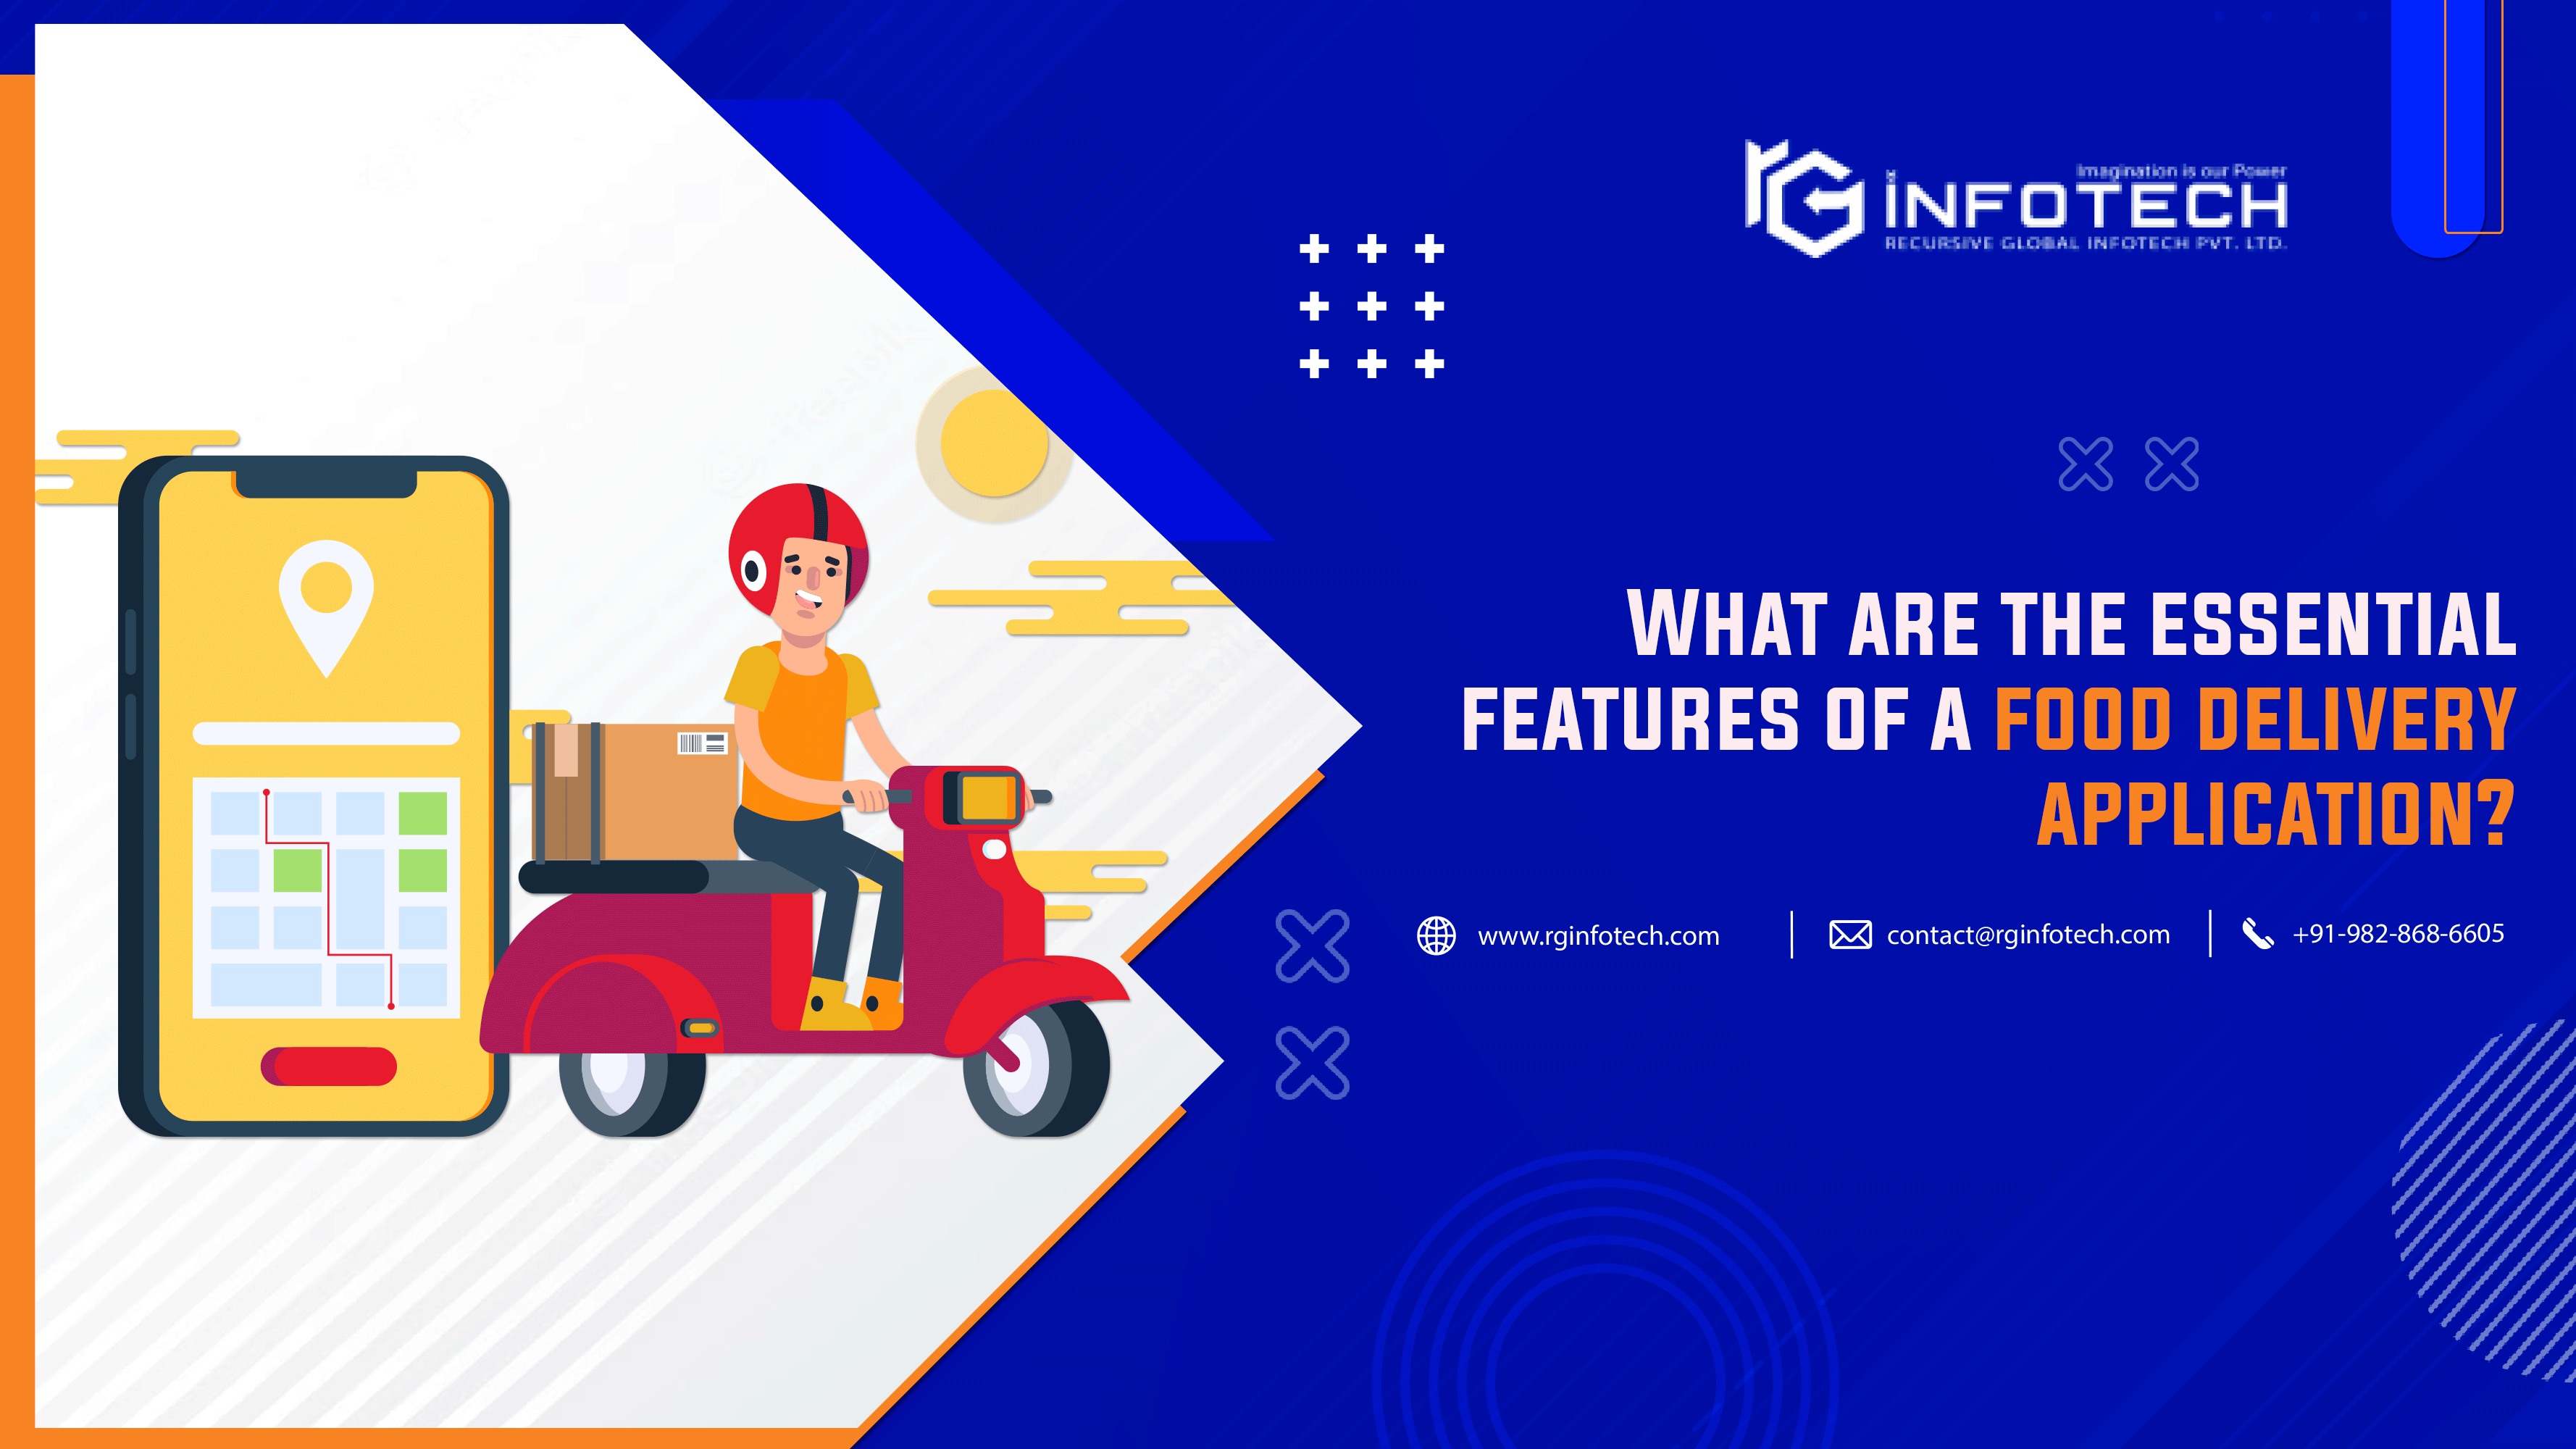 How To Develop An Amazing Food Delivery Application Like Swiggy?